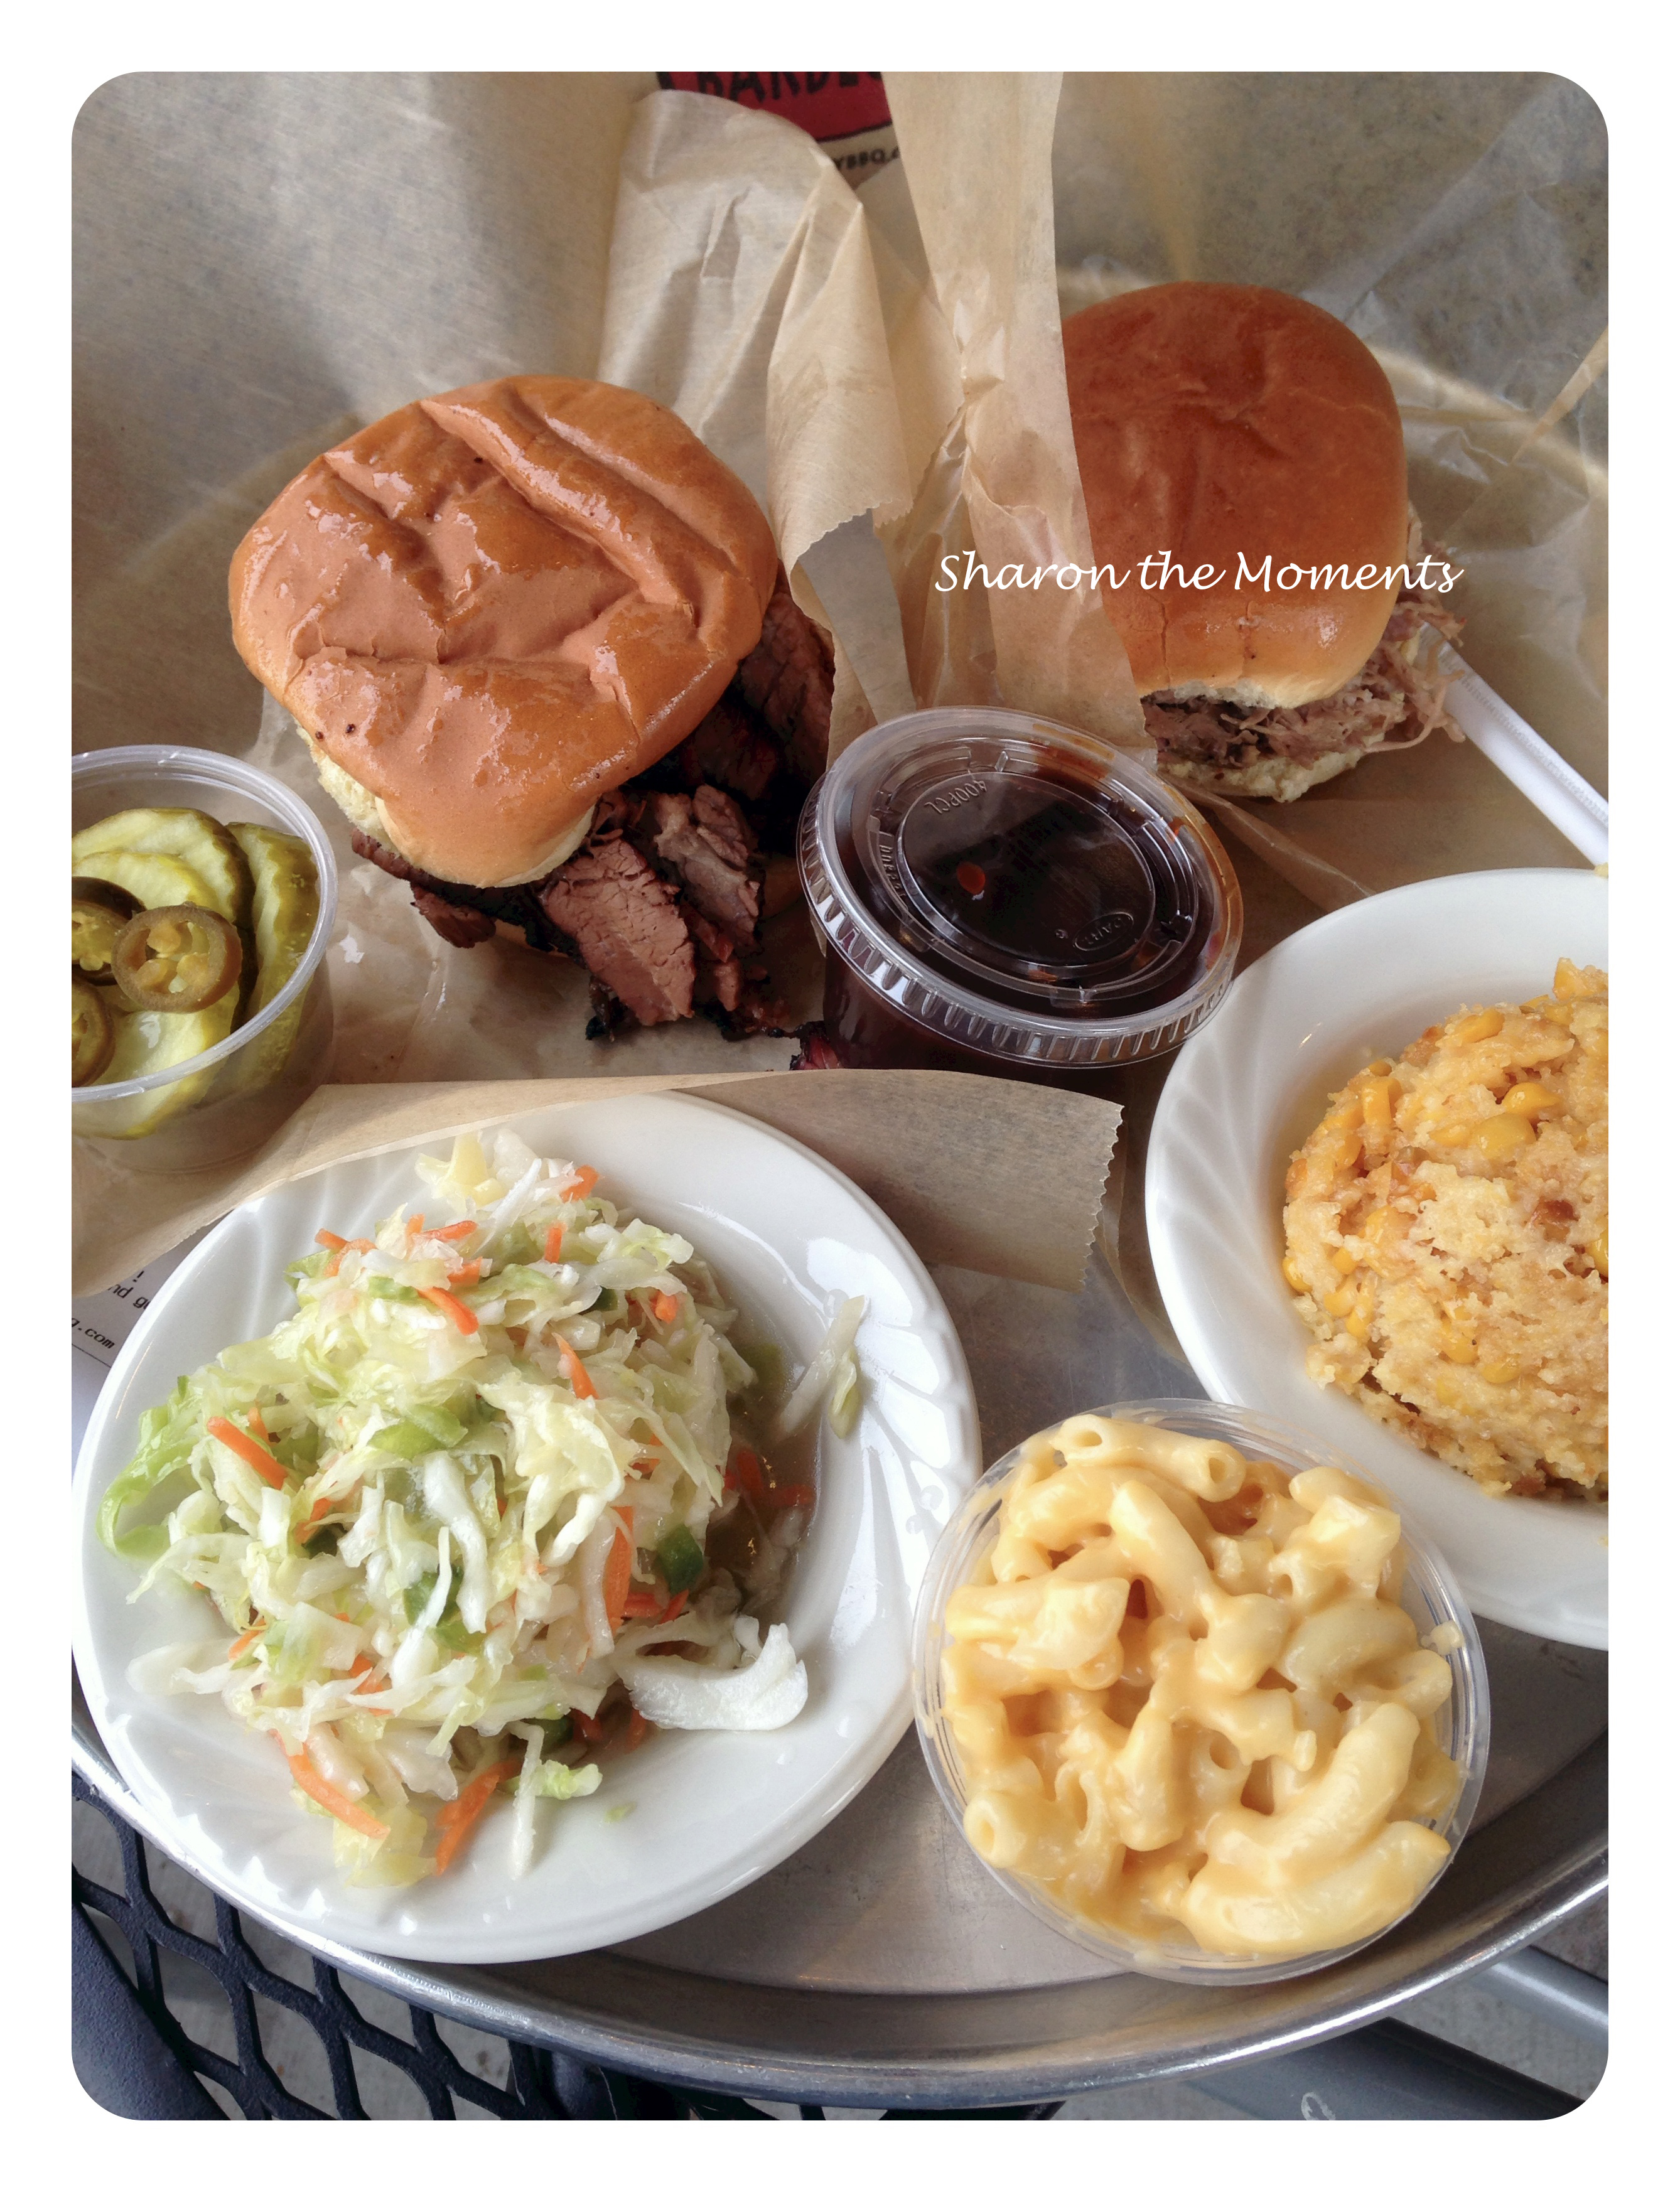 City Barbeque (BBQ) Giveaway|Sharon the Moments Blog